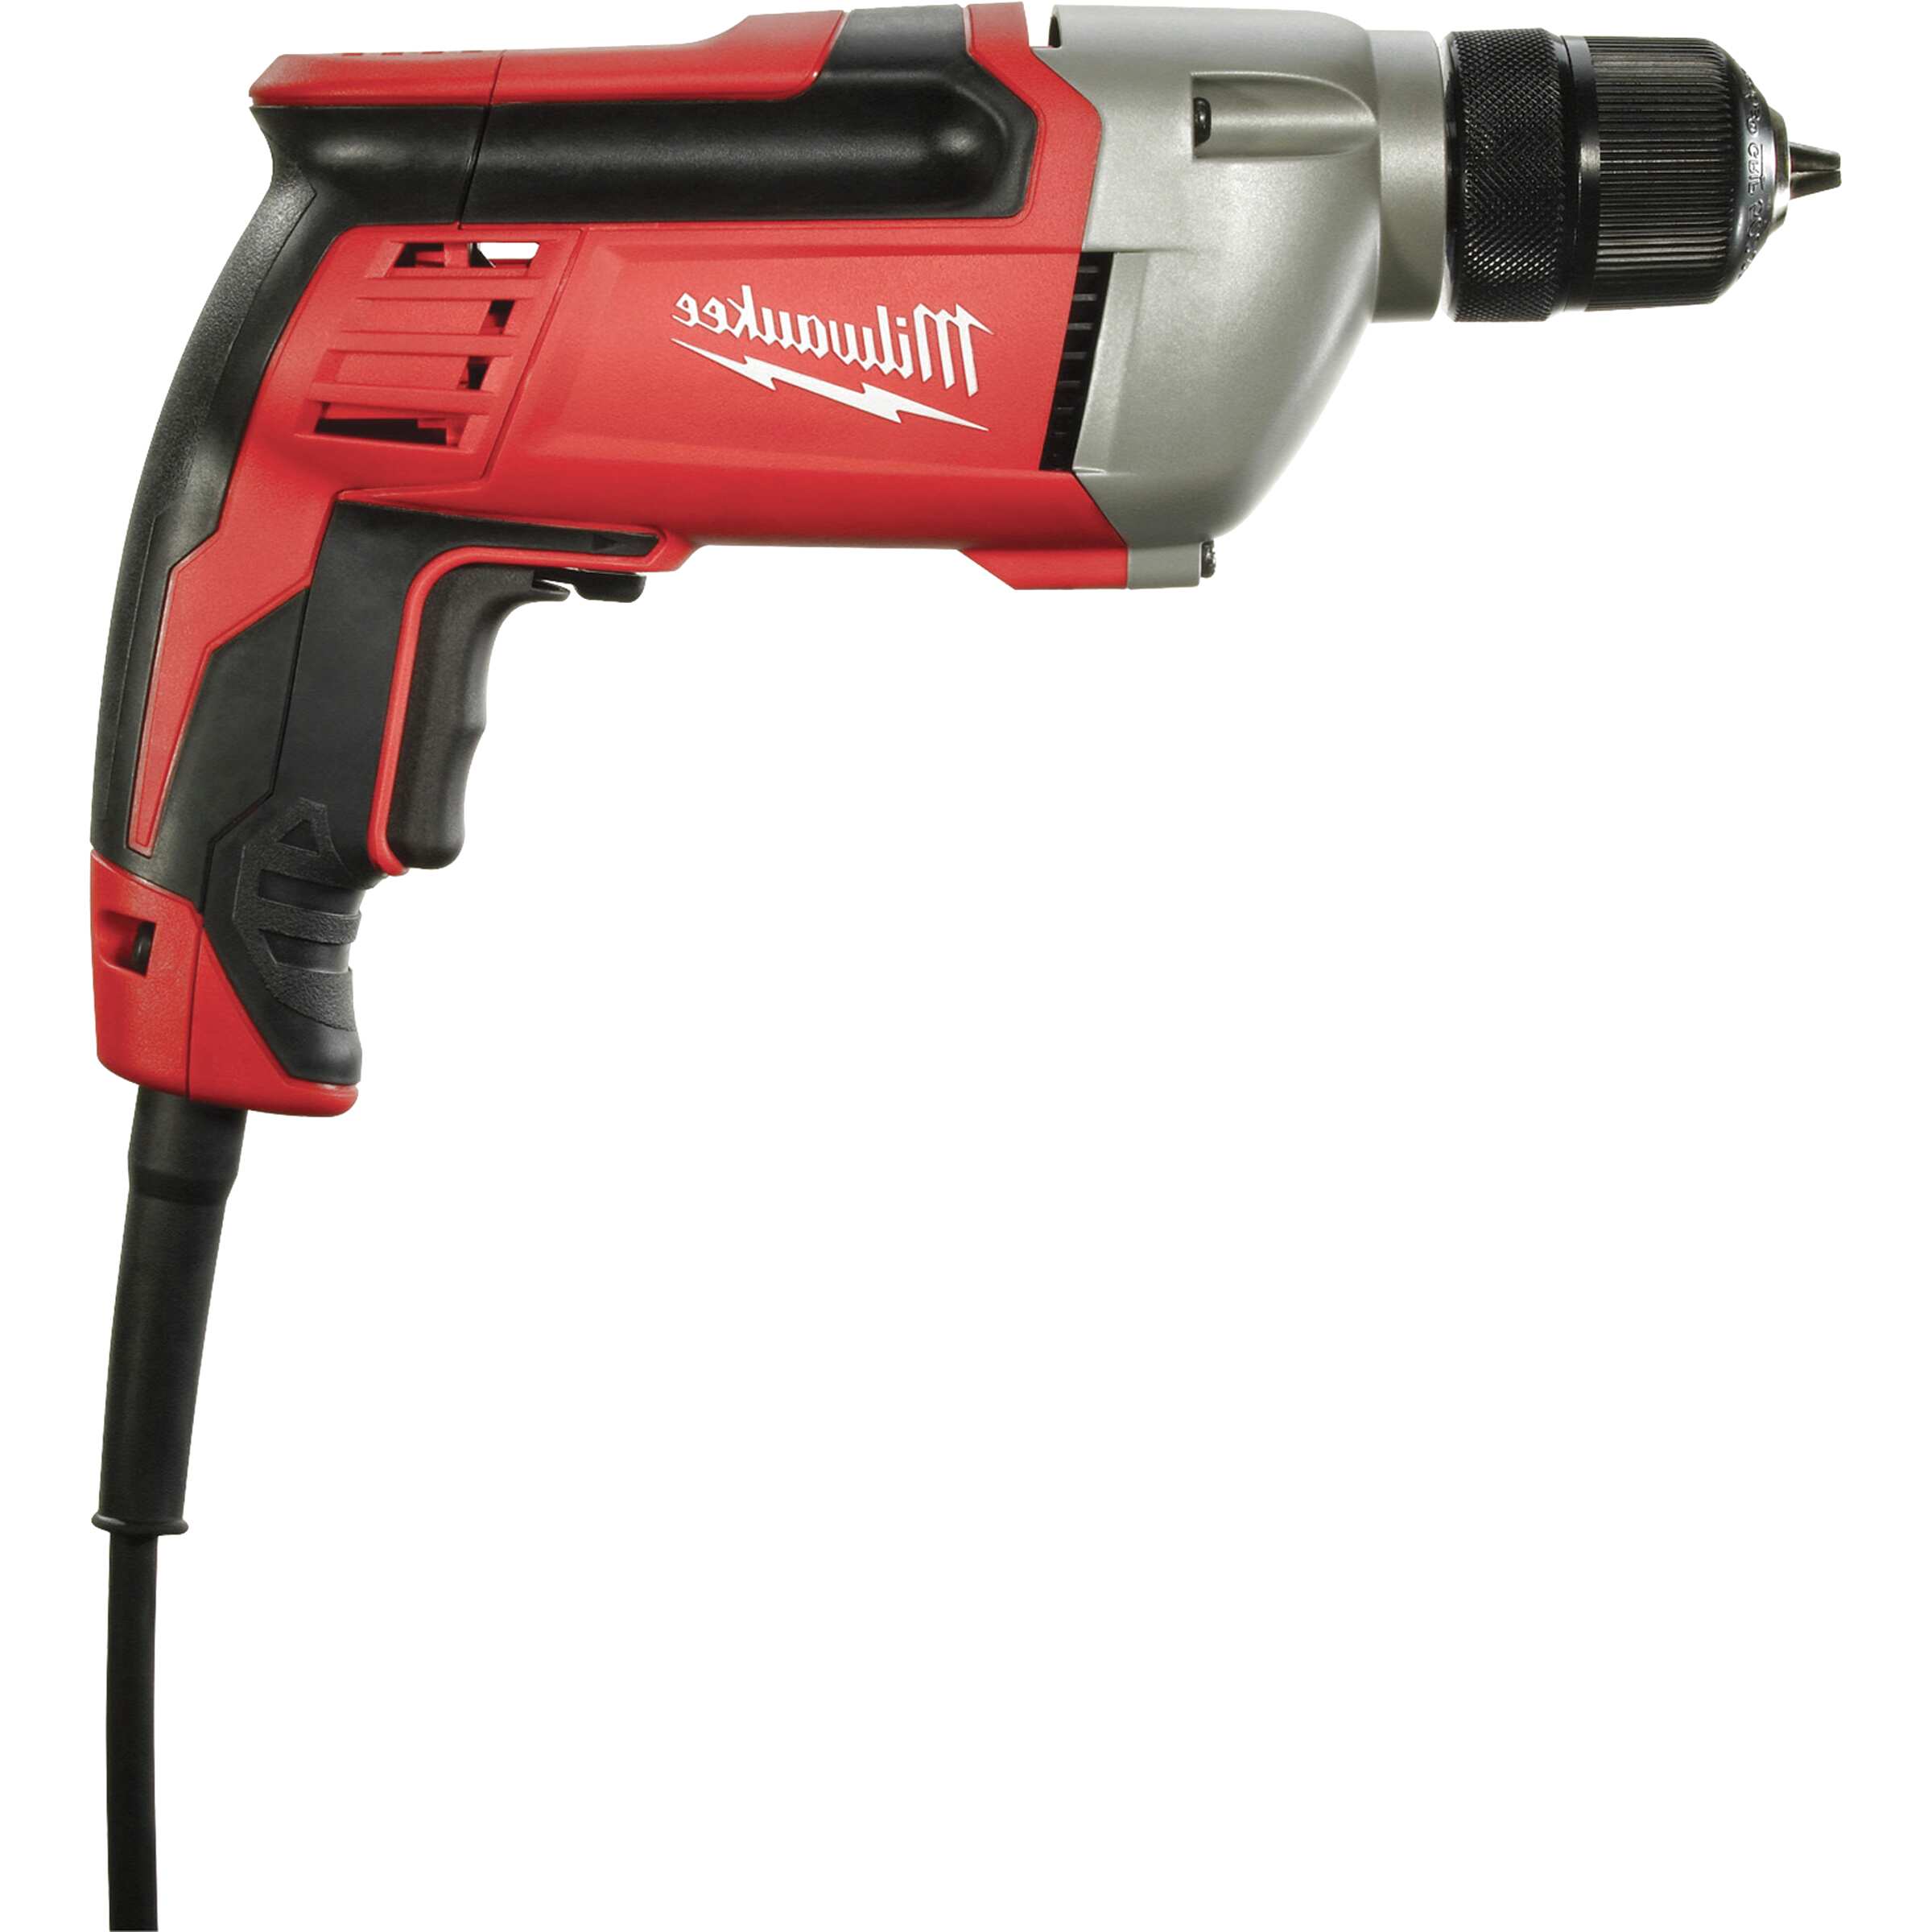 Electric Drill For Sale - Lacey Christa